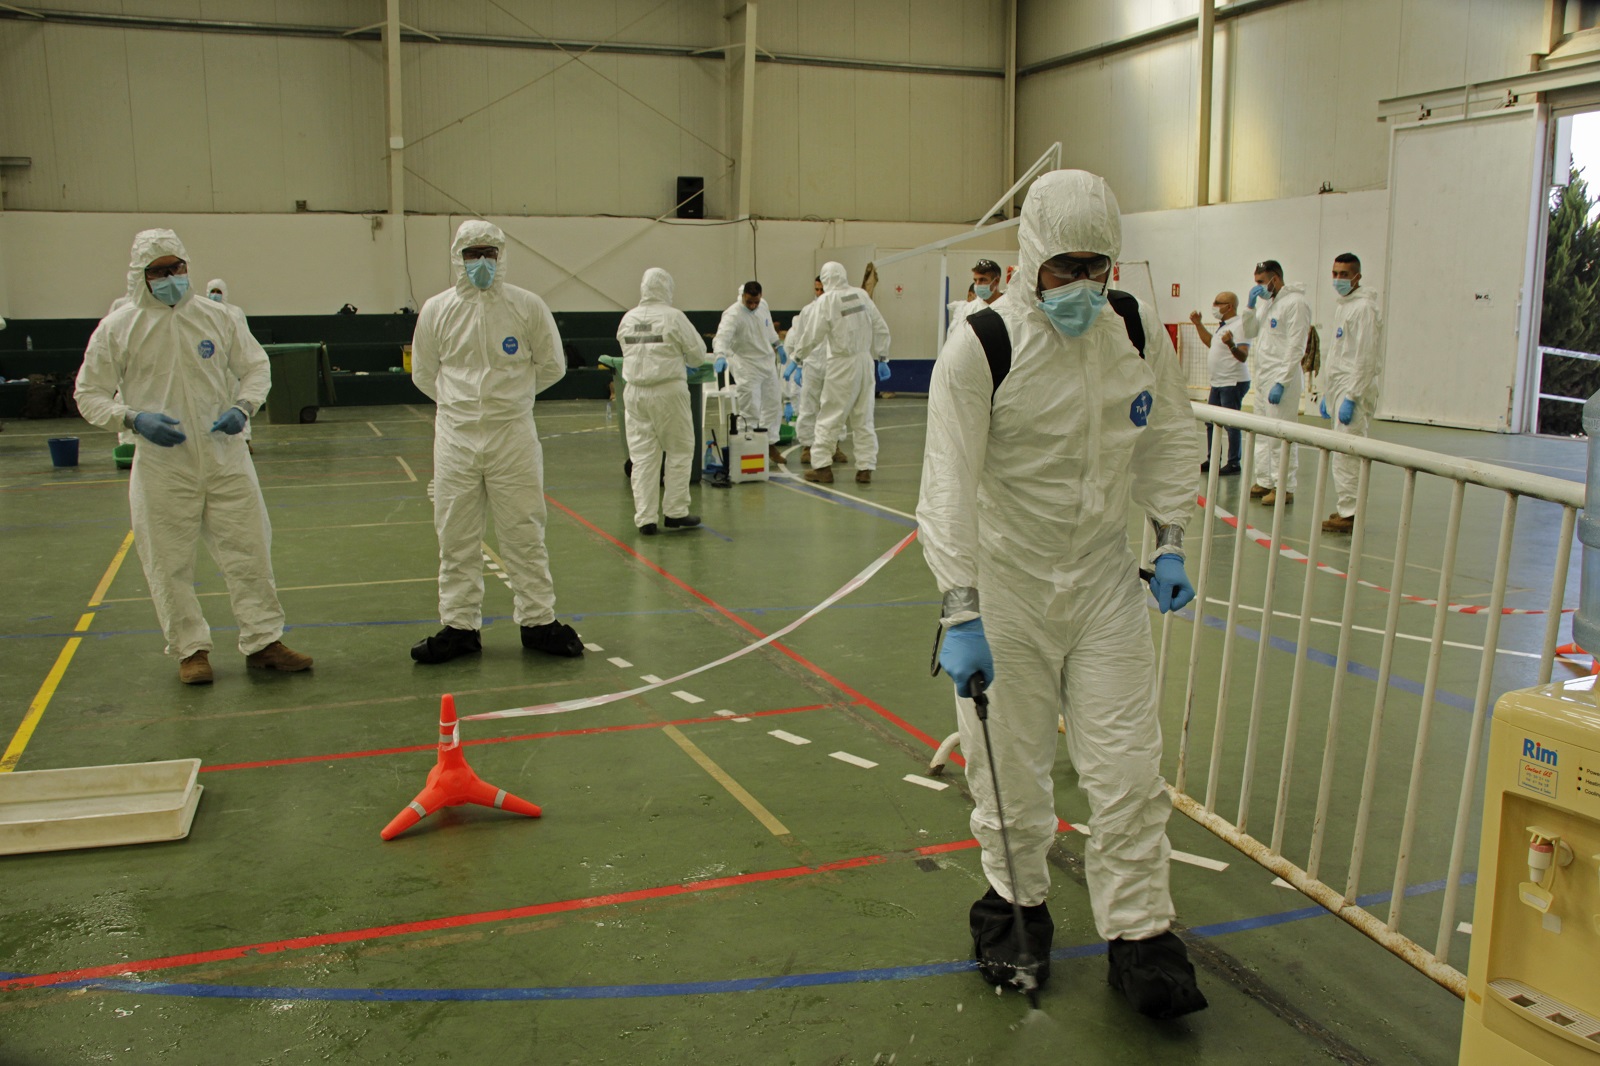 Disinfection of facilities drill